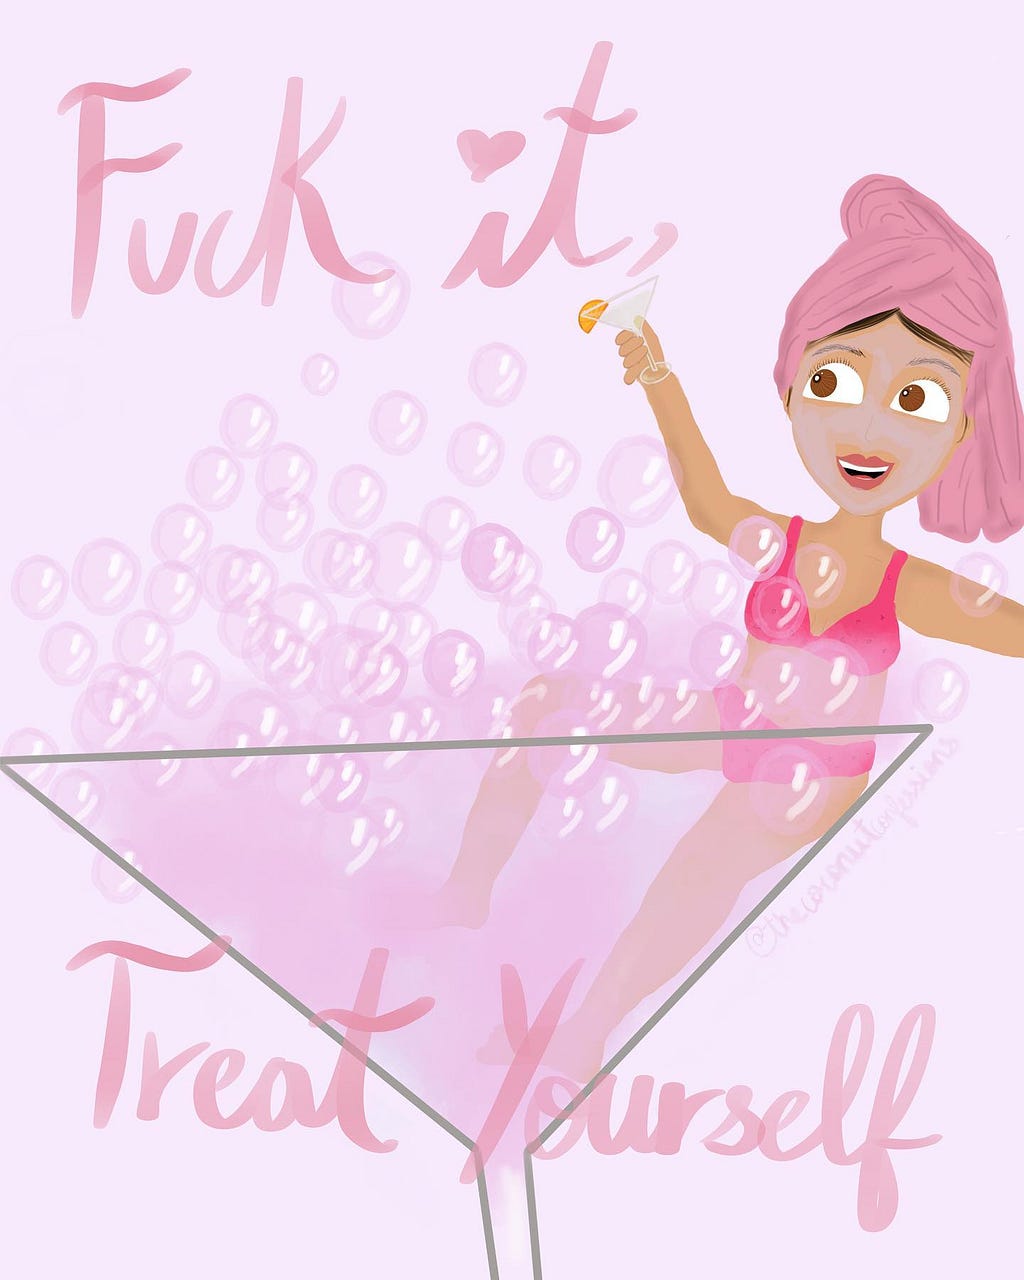 A cartoon girl wearing a bikini and holding a cocktail, while sitting in a huge martini glasses with bubbles. There is pink text that reads ‘Fuck it, treat yourself’